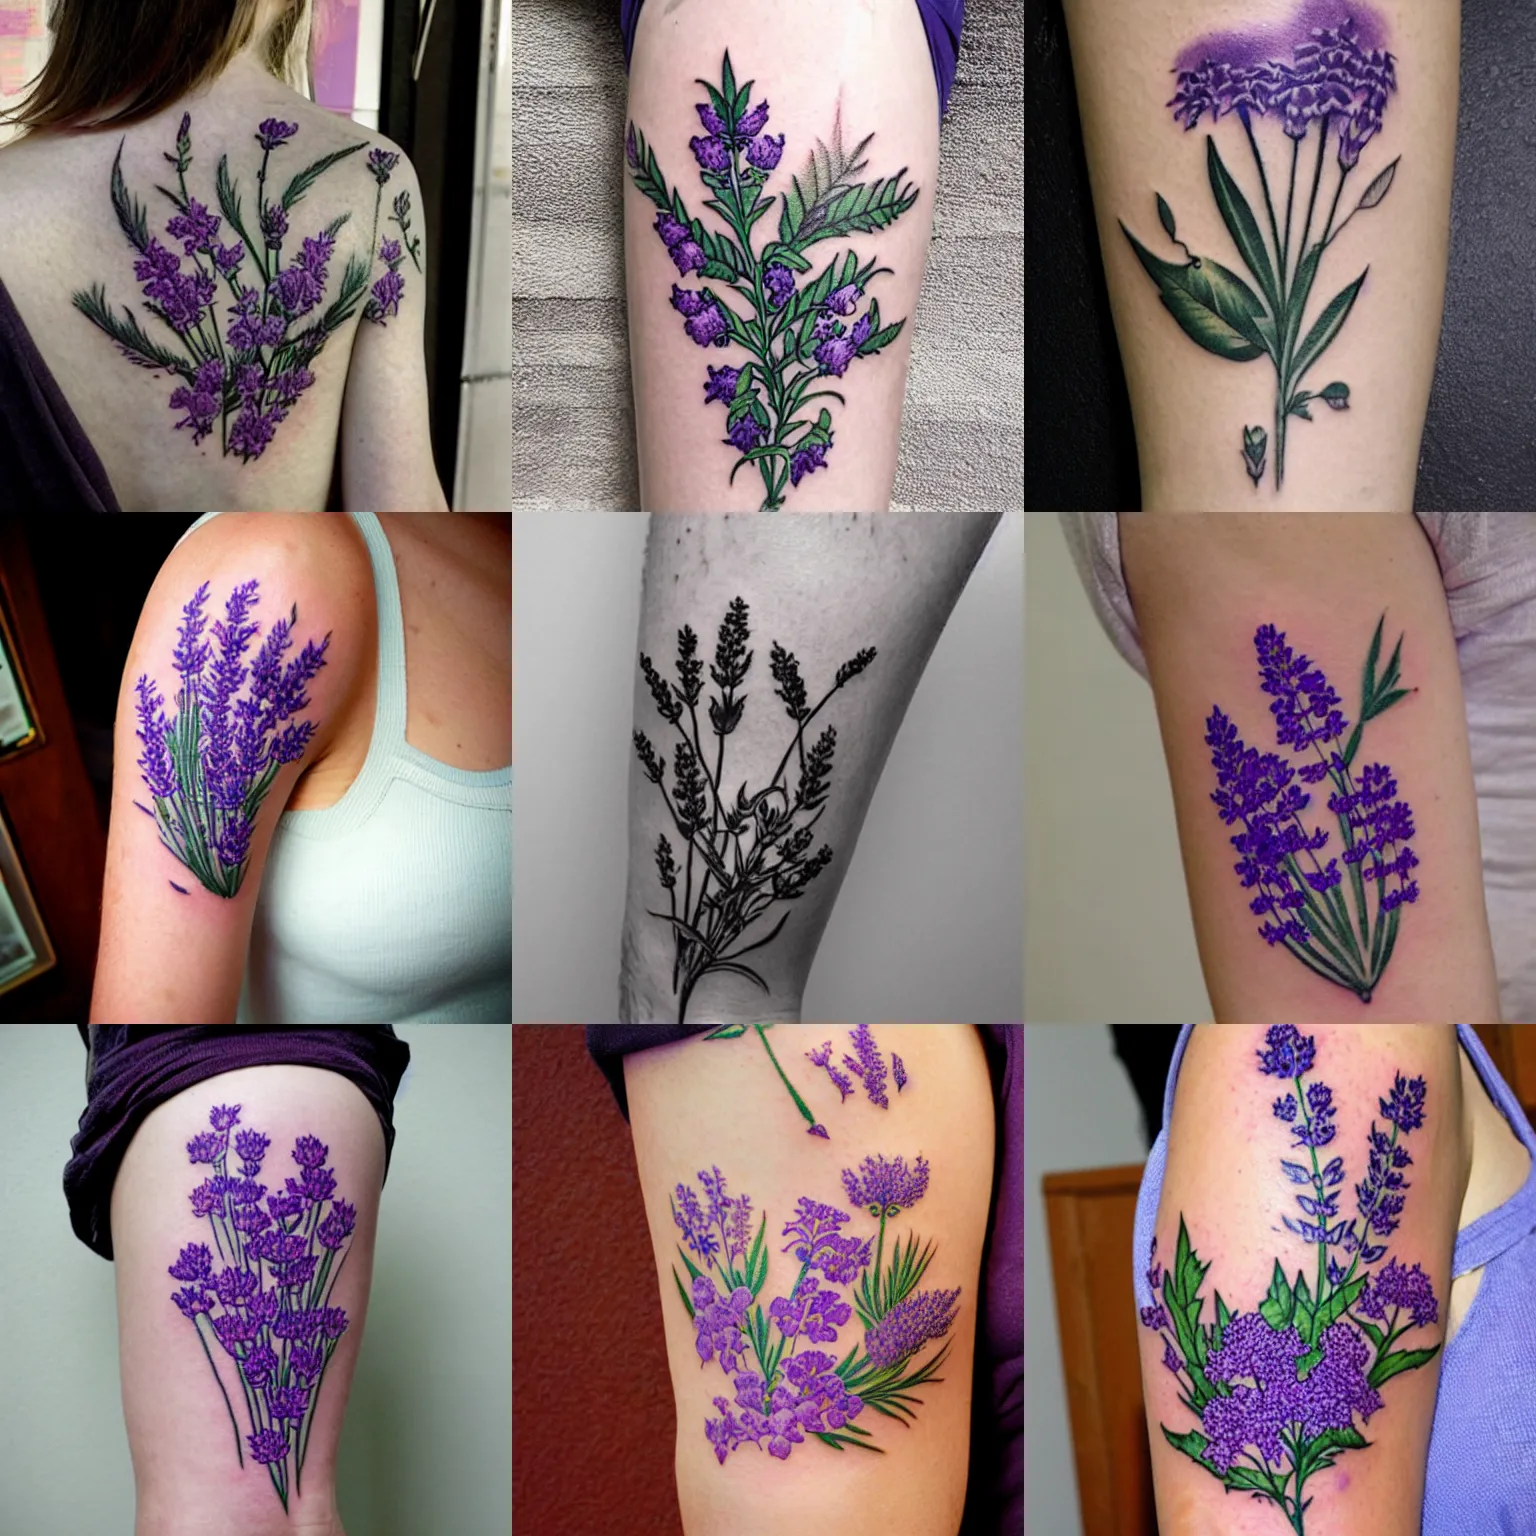 These 15 Tattoos Made With Real Plants and Flowers Look Like No Other  Tattoos Out There